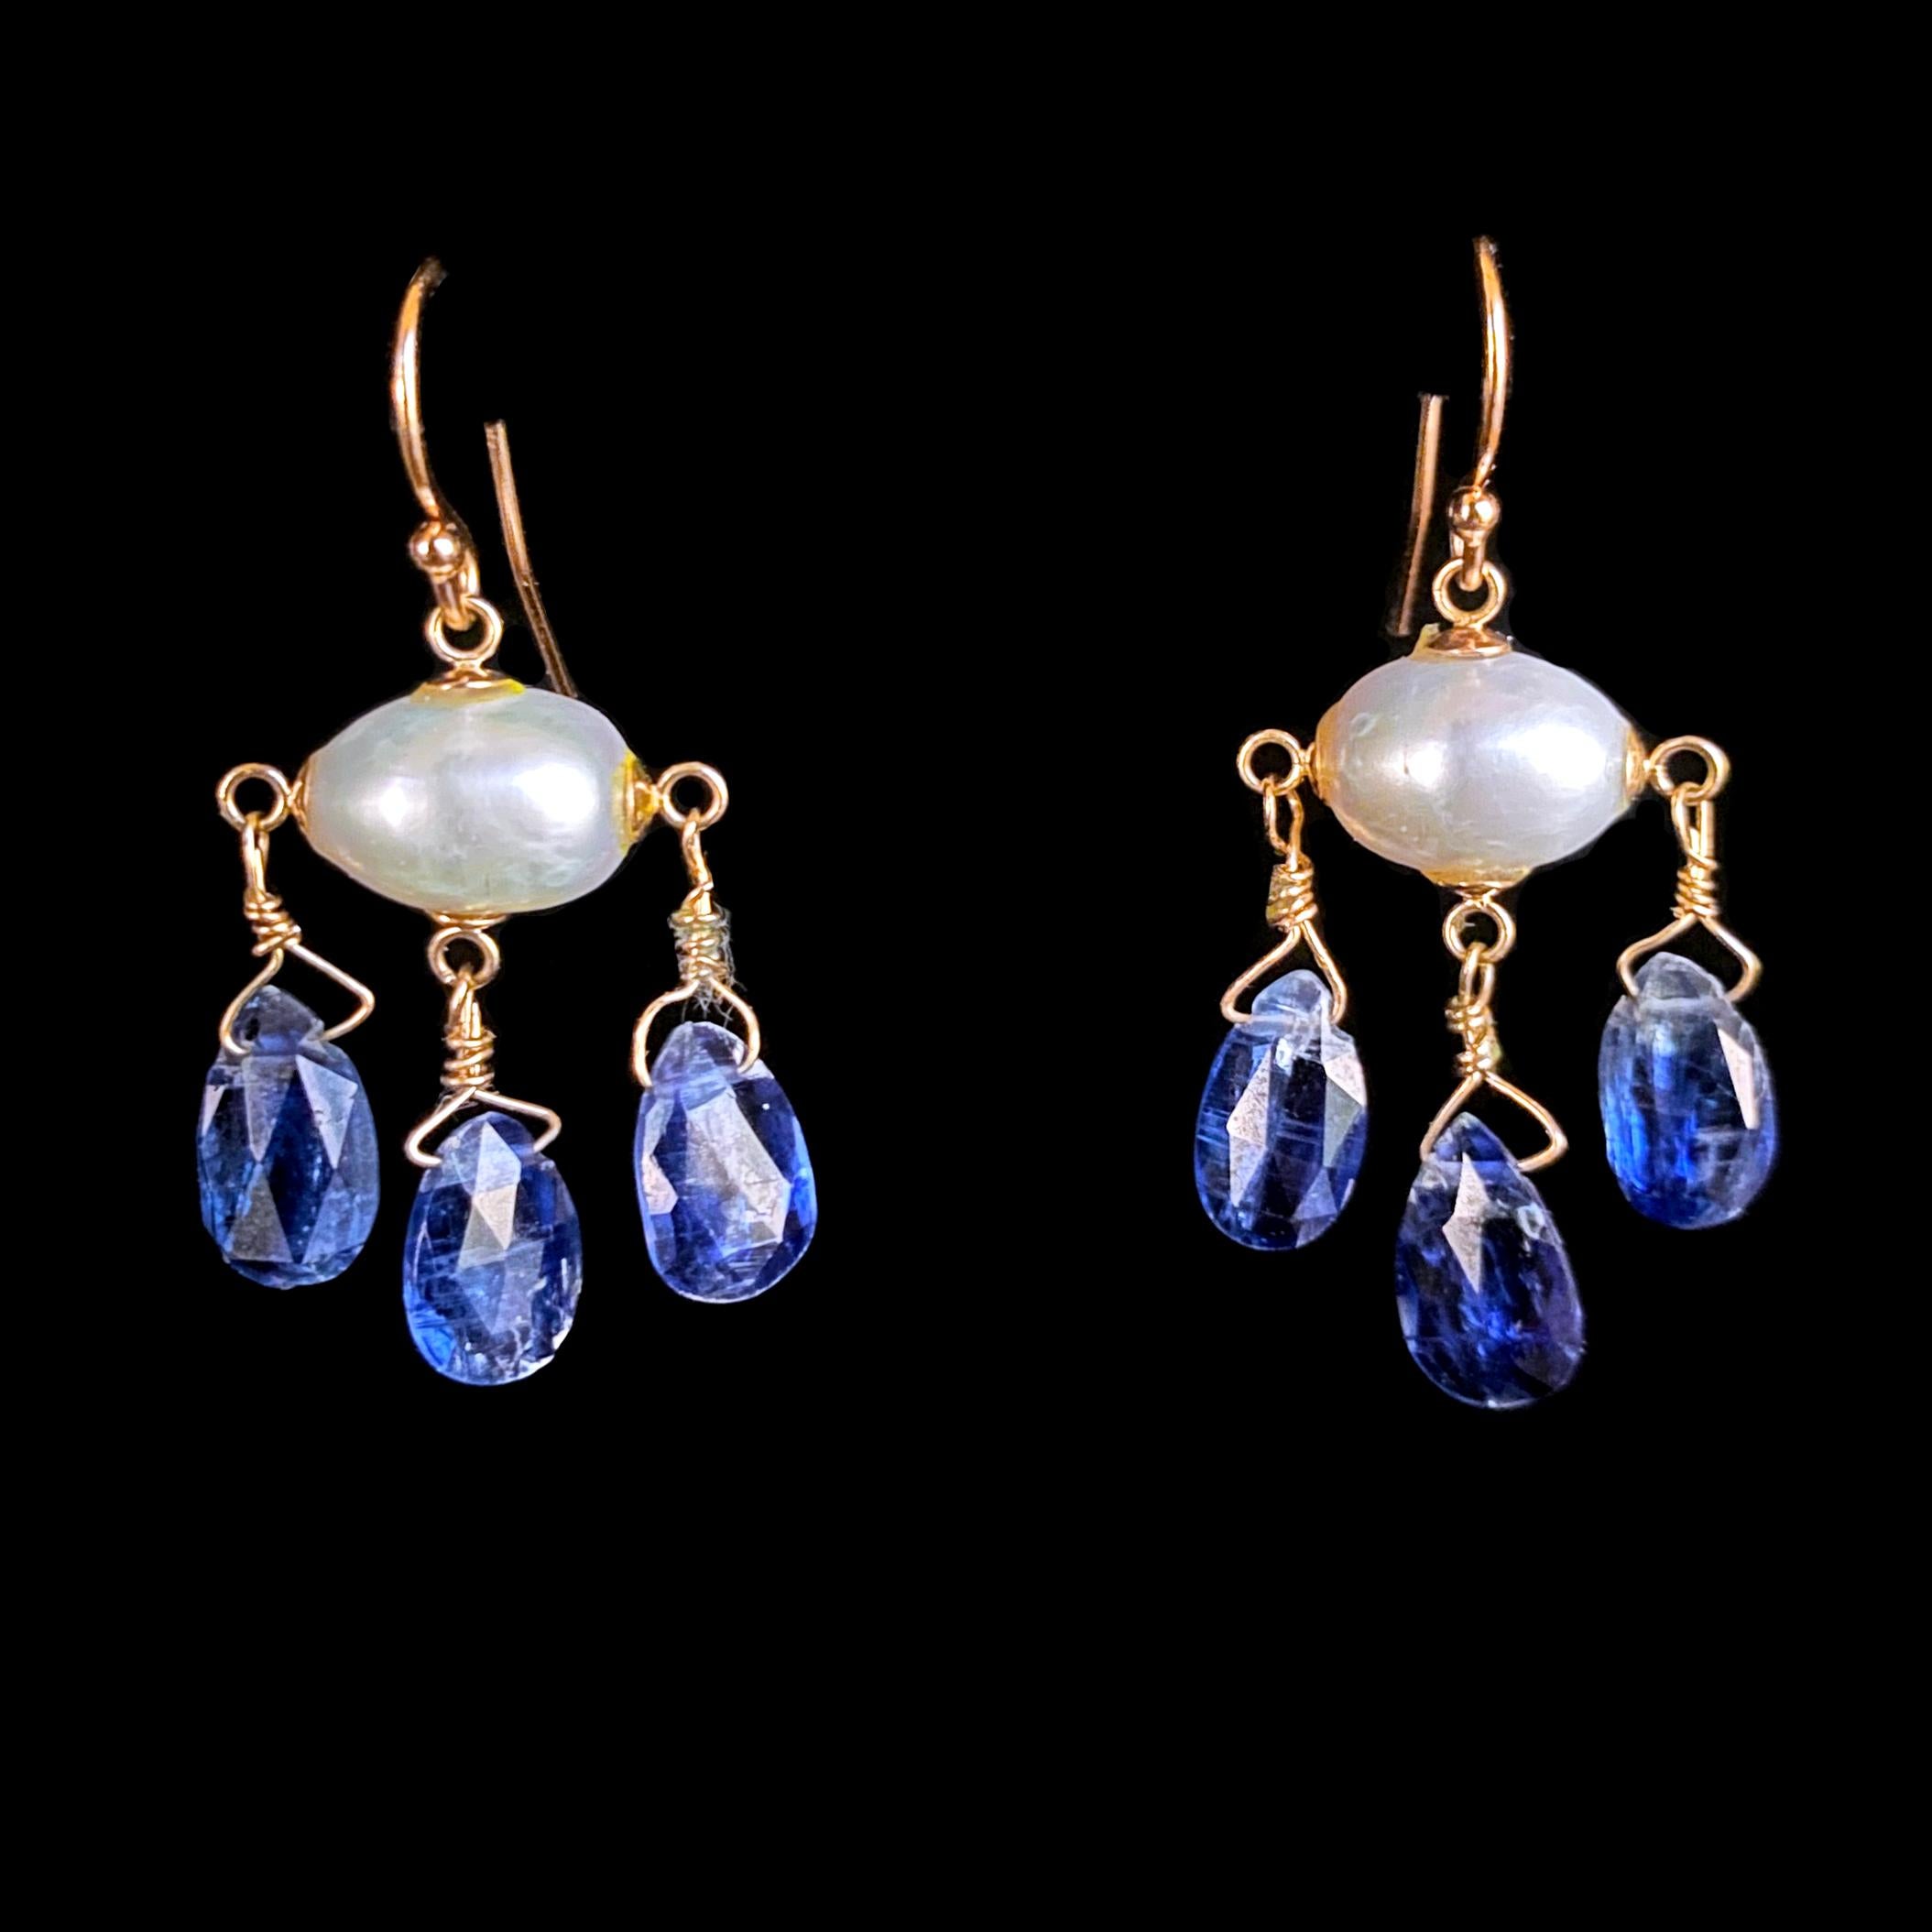 Stunning pair of Earrings by Marina J. This pair is made with all solid 14k Yellow Gold wiring and hooks. A Baroque Pearl with a beautiful iridescent luster sits as three vivid Blue Kyanite teardrop Briolettes hang from it. The Blue Kyanite display